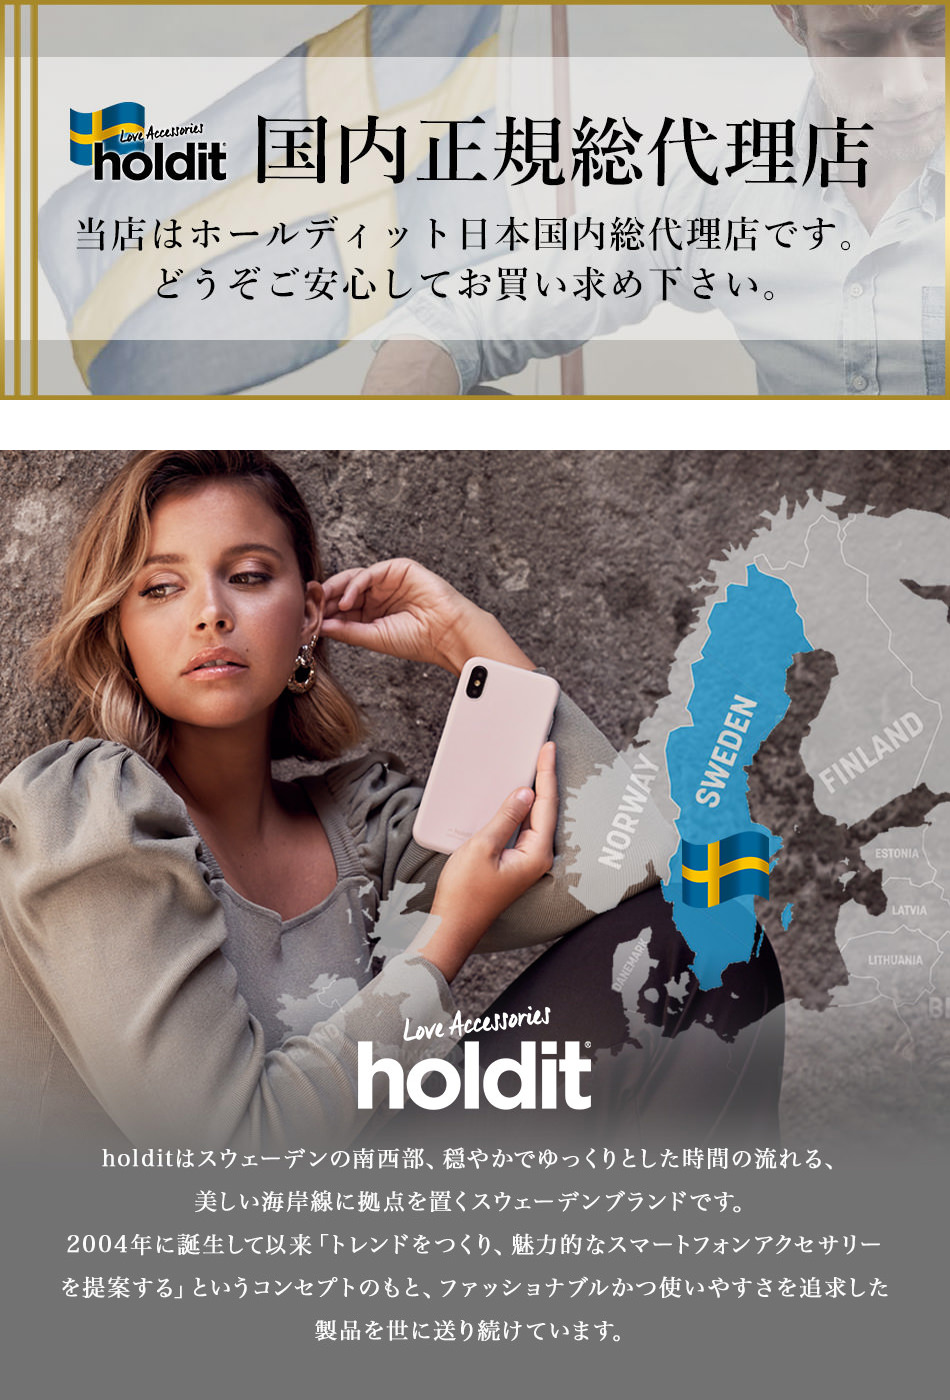 about holdit